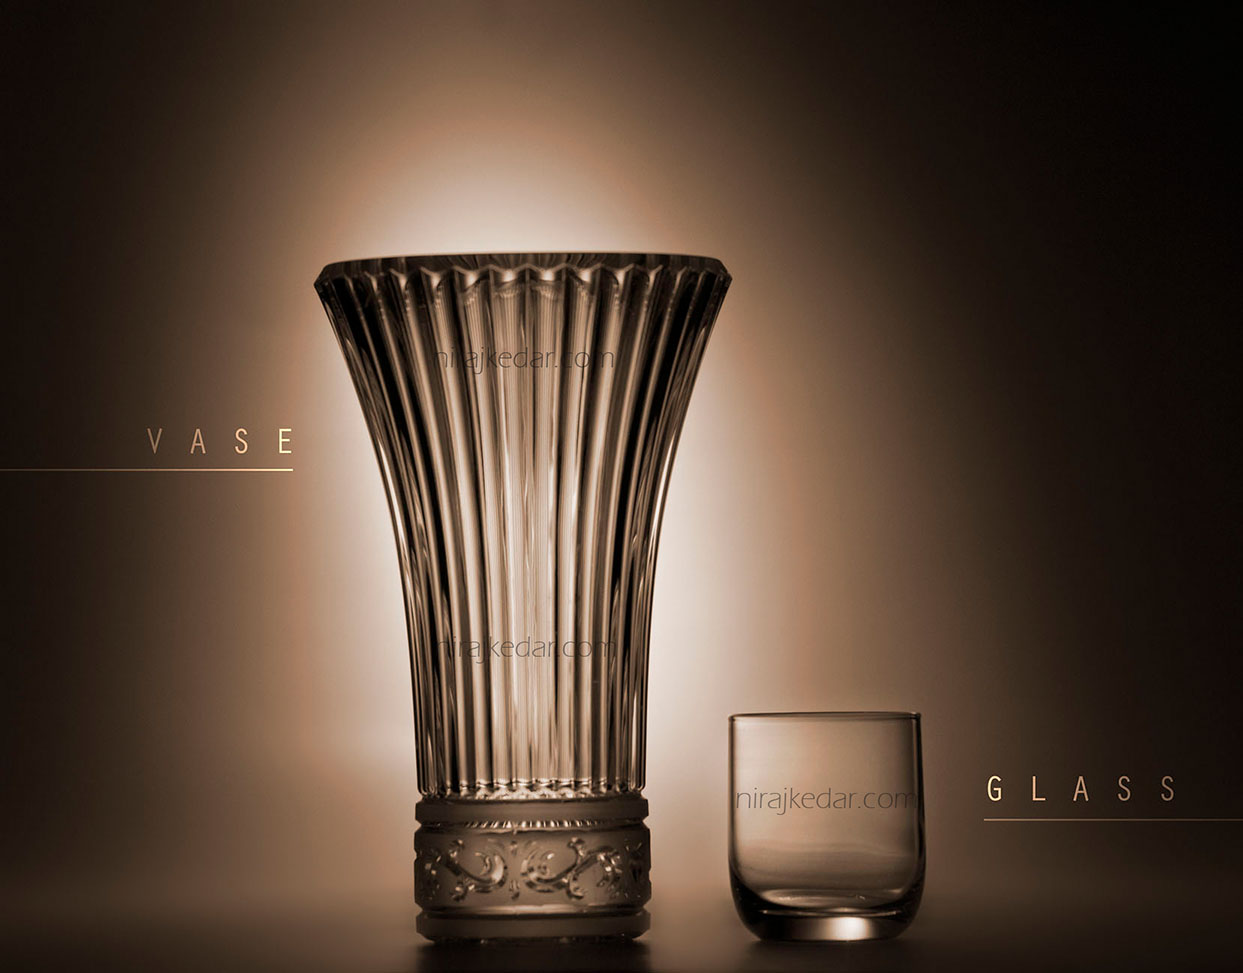 Vase and glass